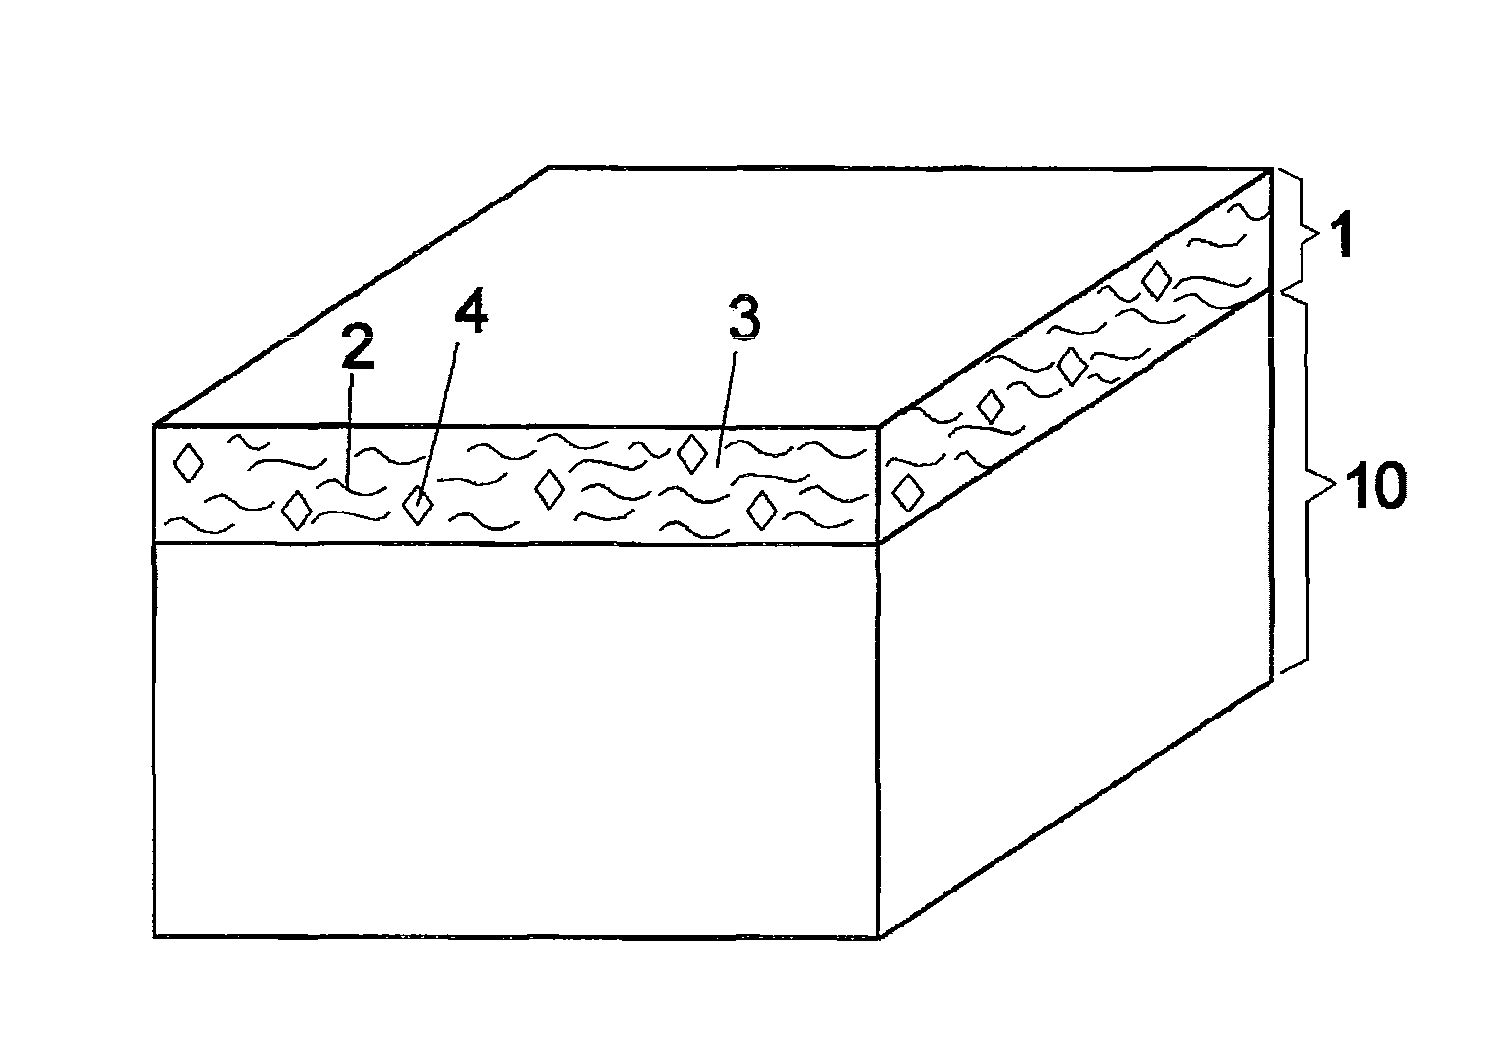 Panel, Use of a Panel, Method for Manufacturing a Panel and a Prepreg